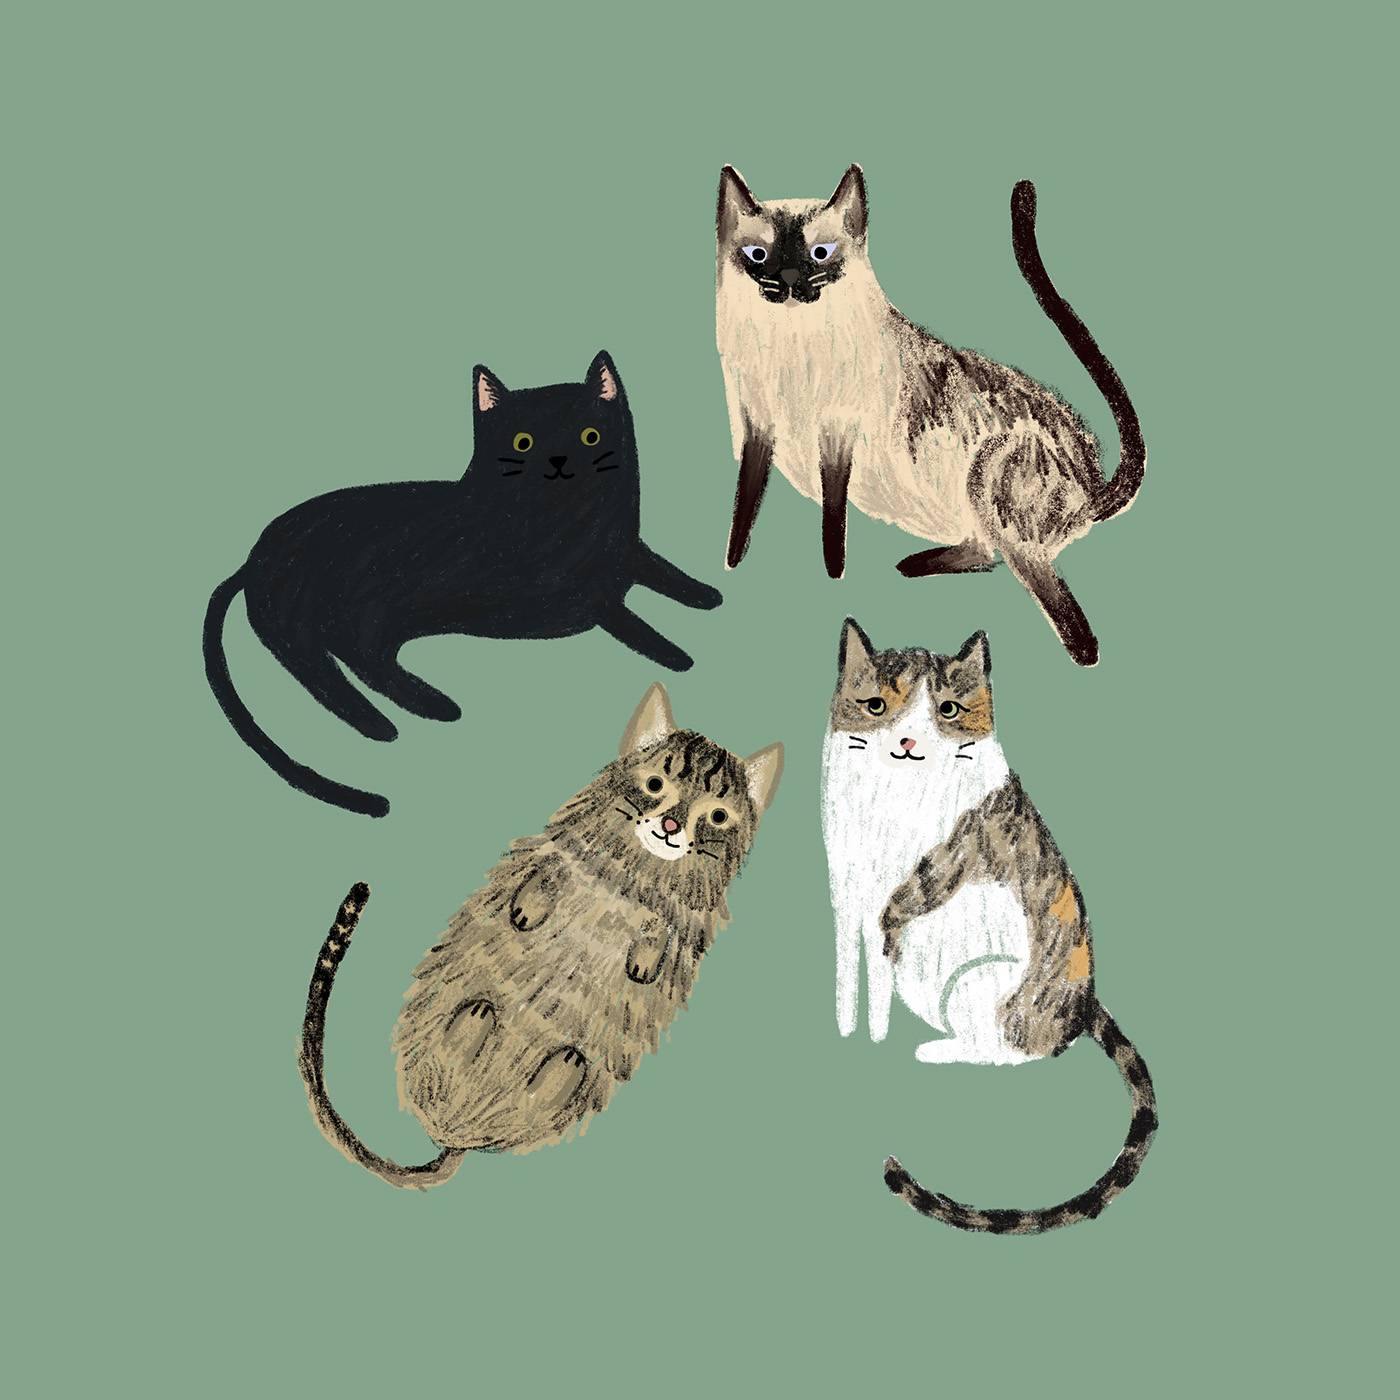 Illustration of a group of 4 different cats (black, ragdoll and tabbies) happily posing on a green background